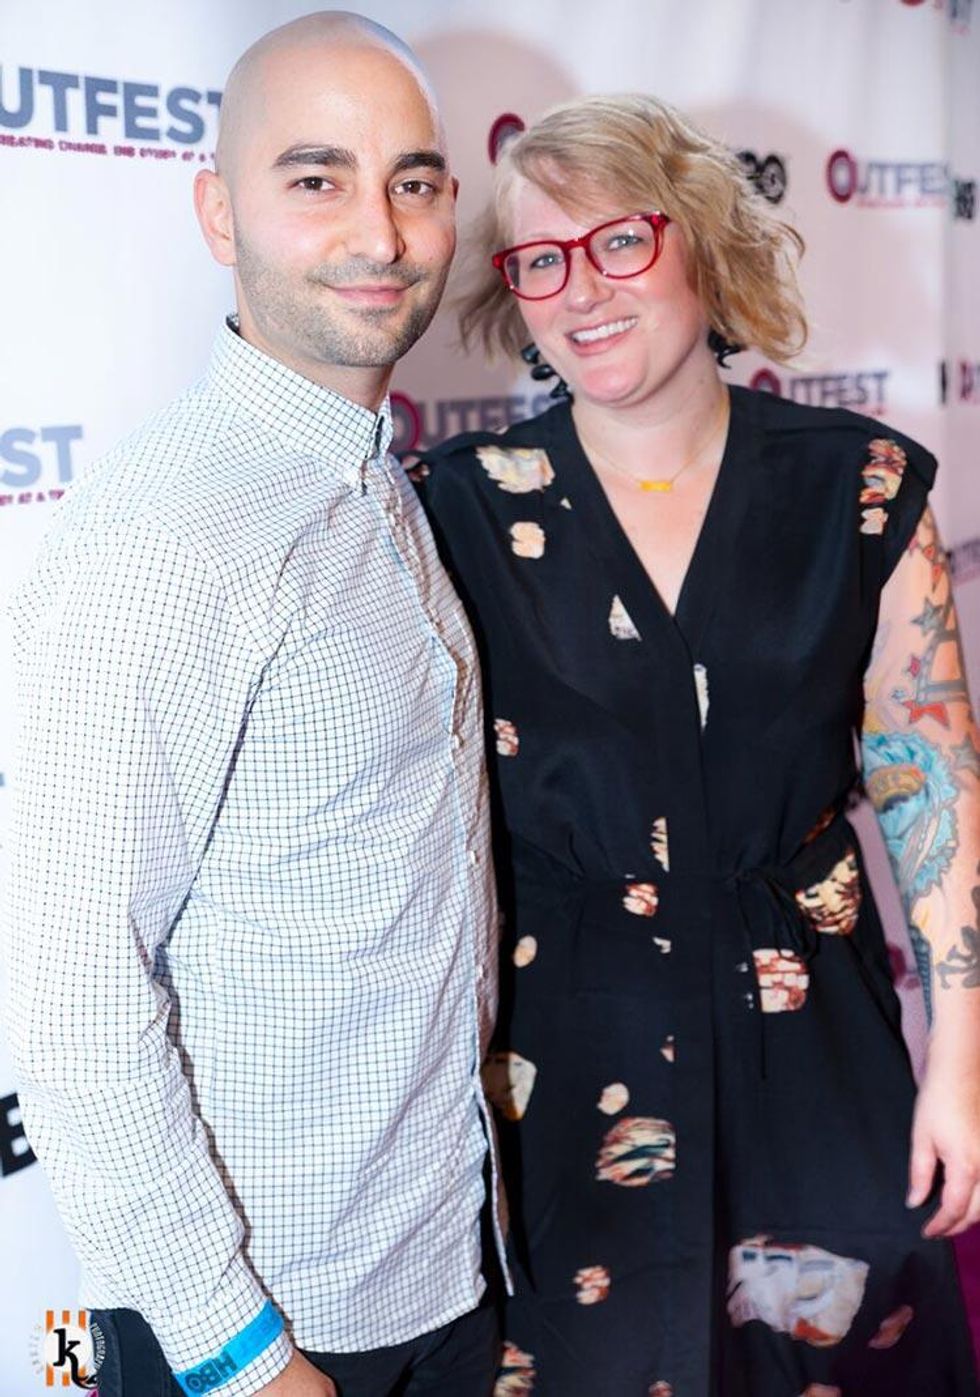 14_outfest-2016-photo-by-connie-kurtew-012